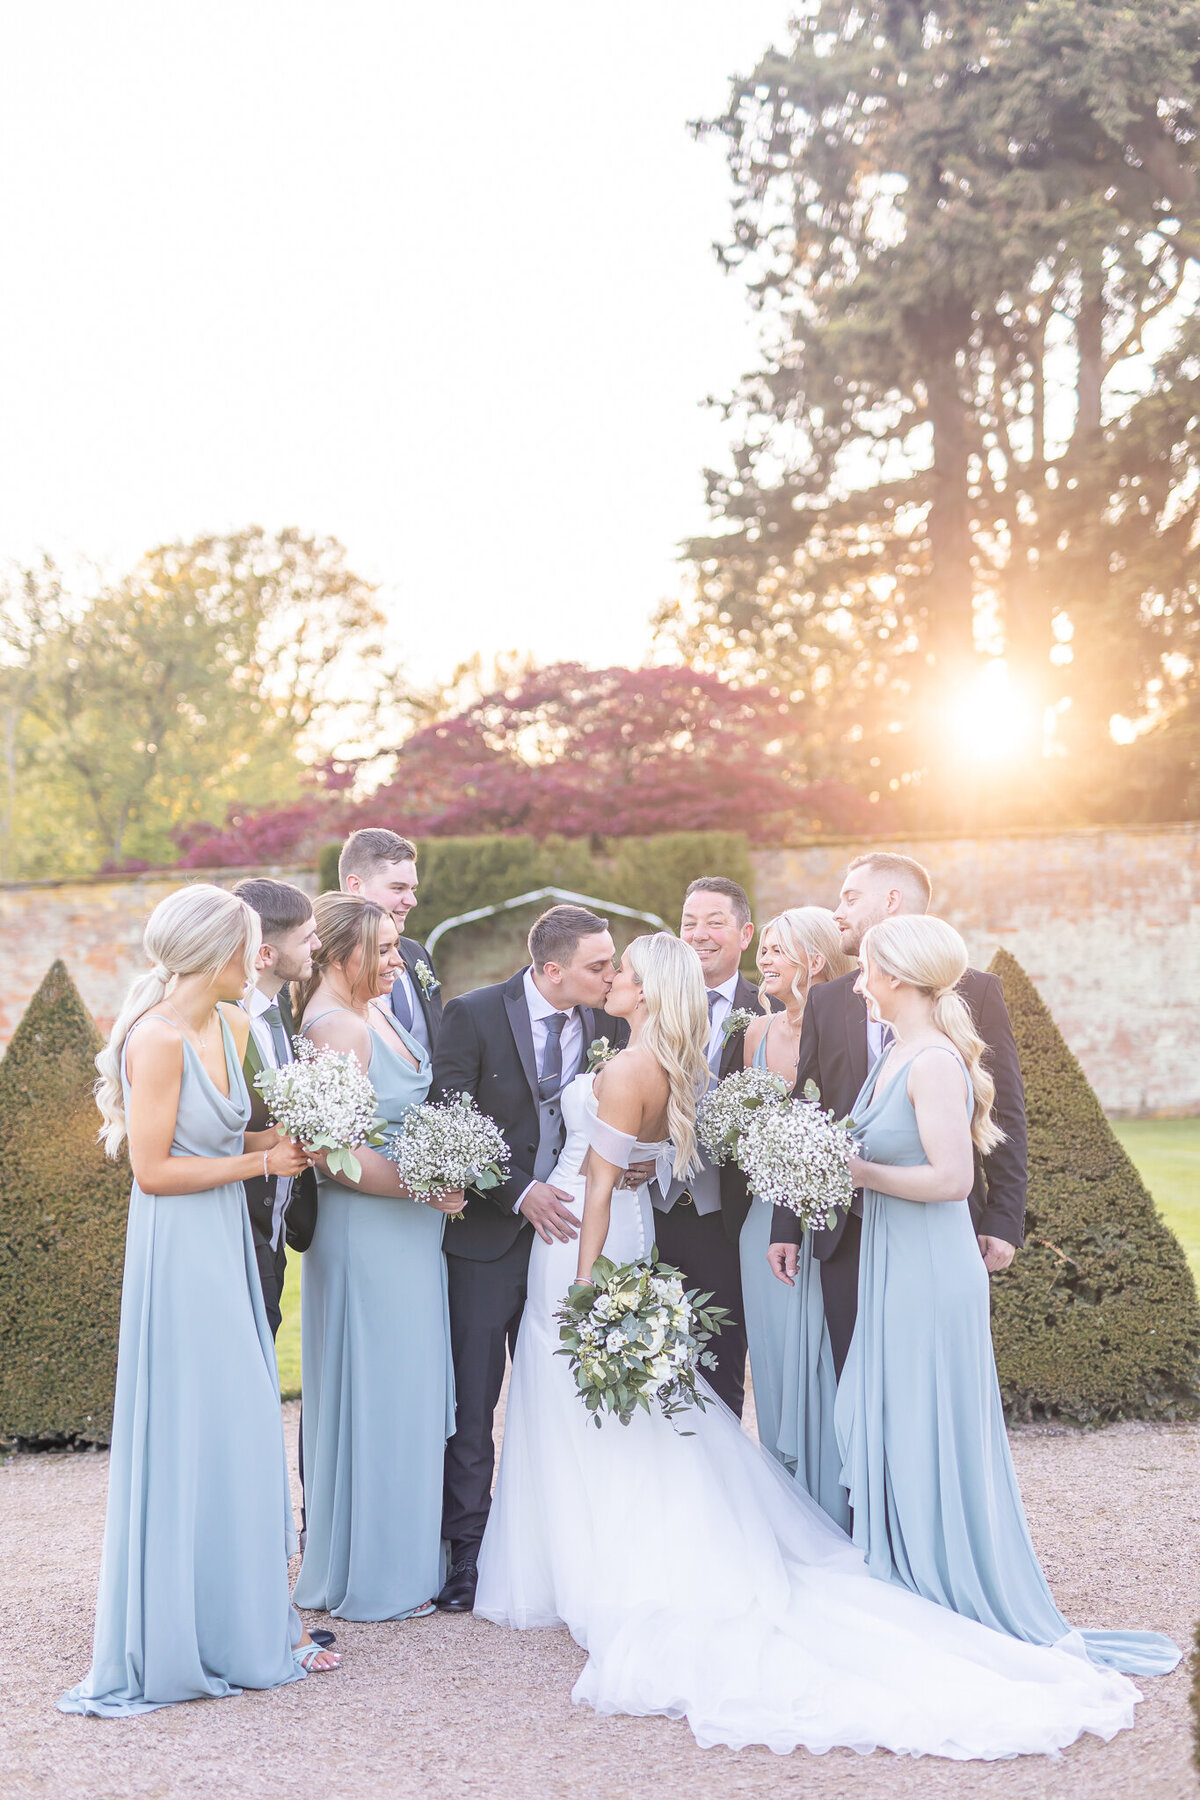 Bride and groom kissing surrounded by the bridal party at Combermere Abbey Cheshire